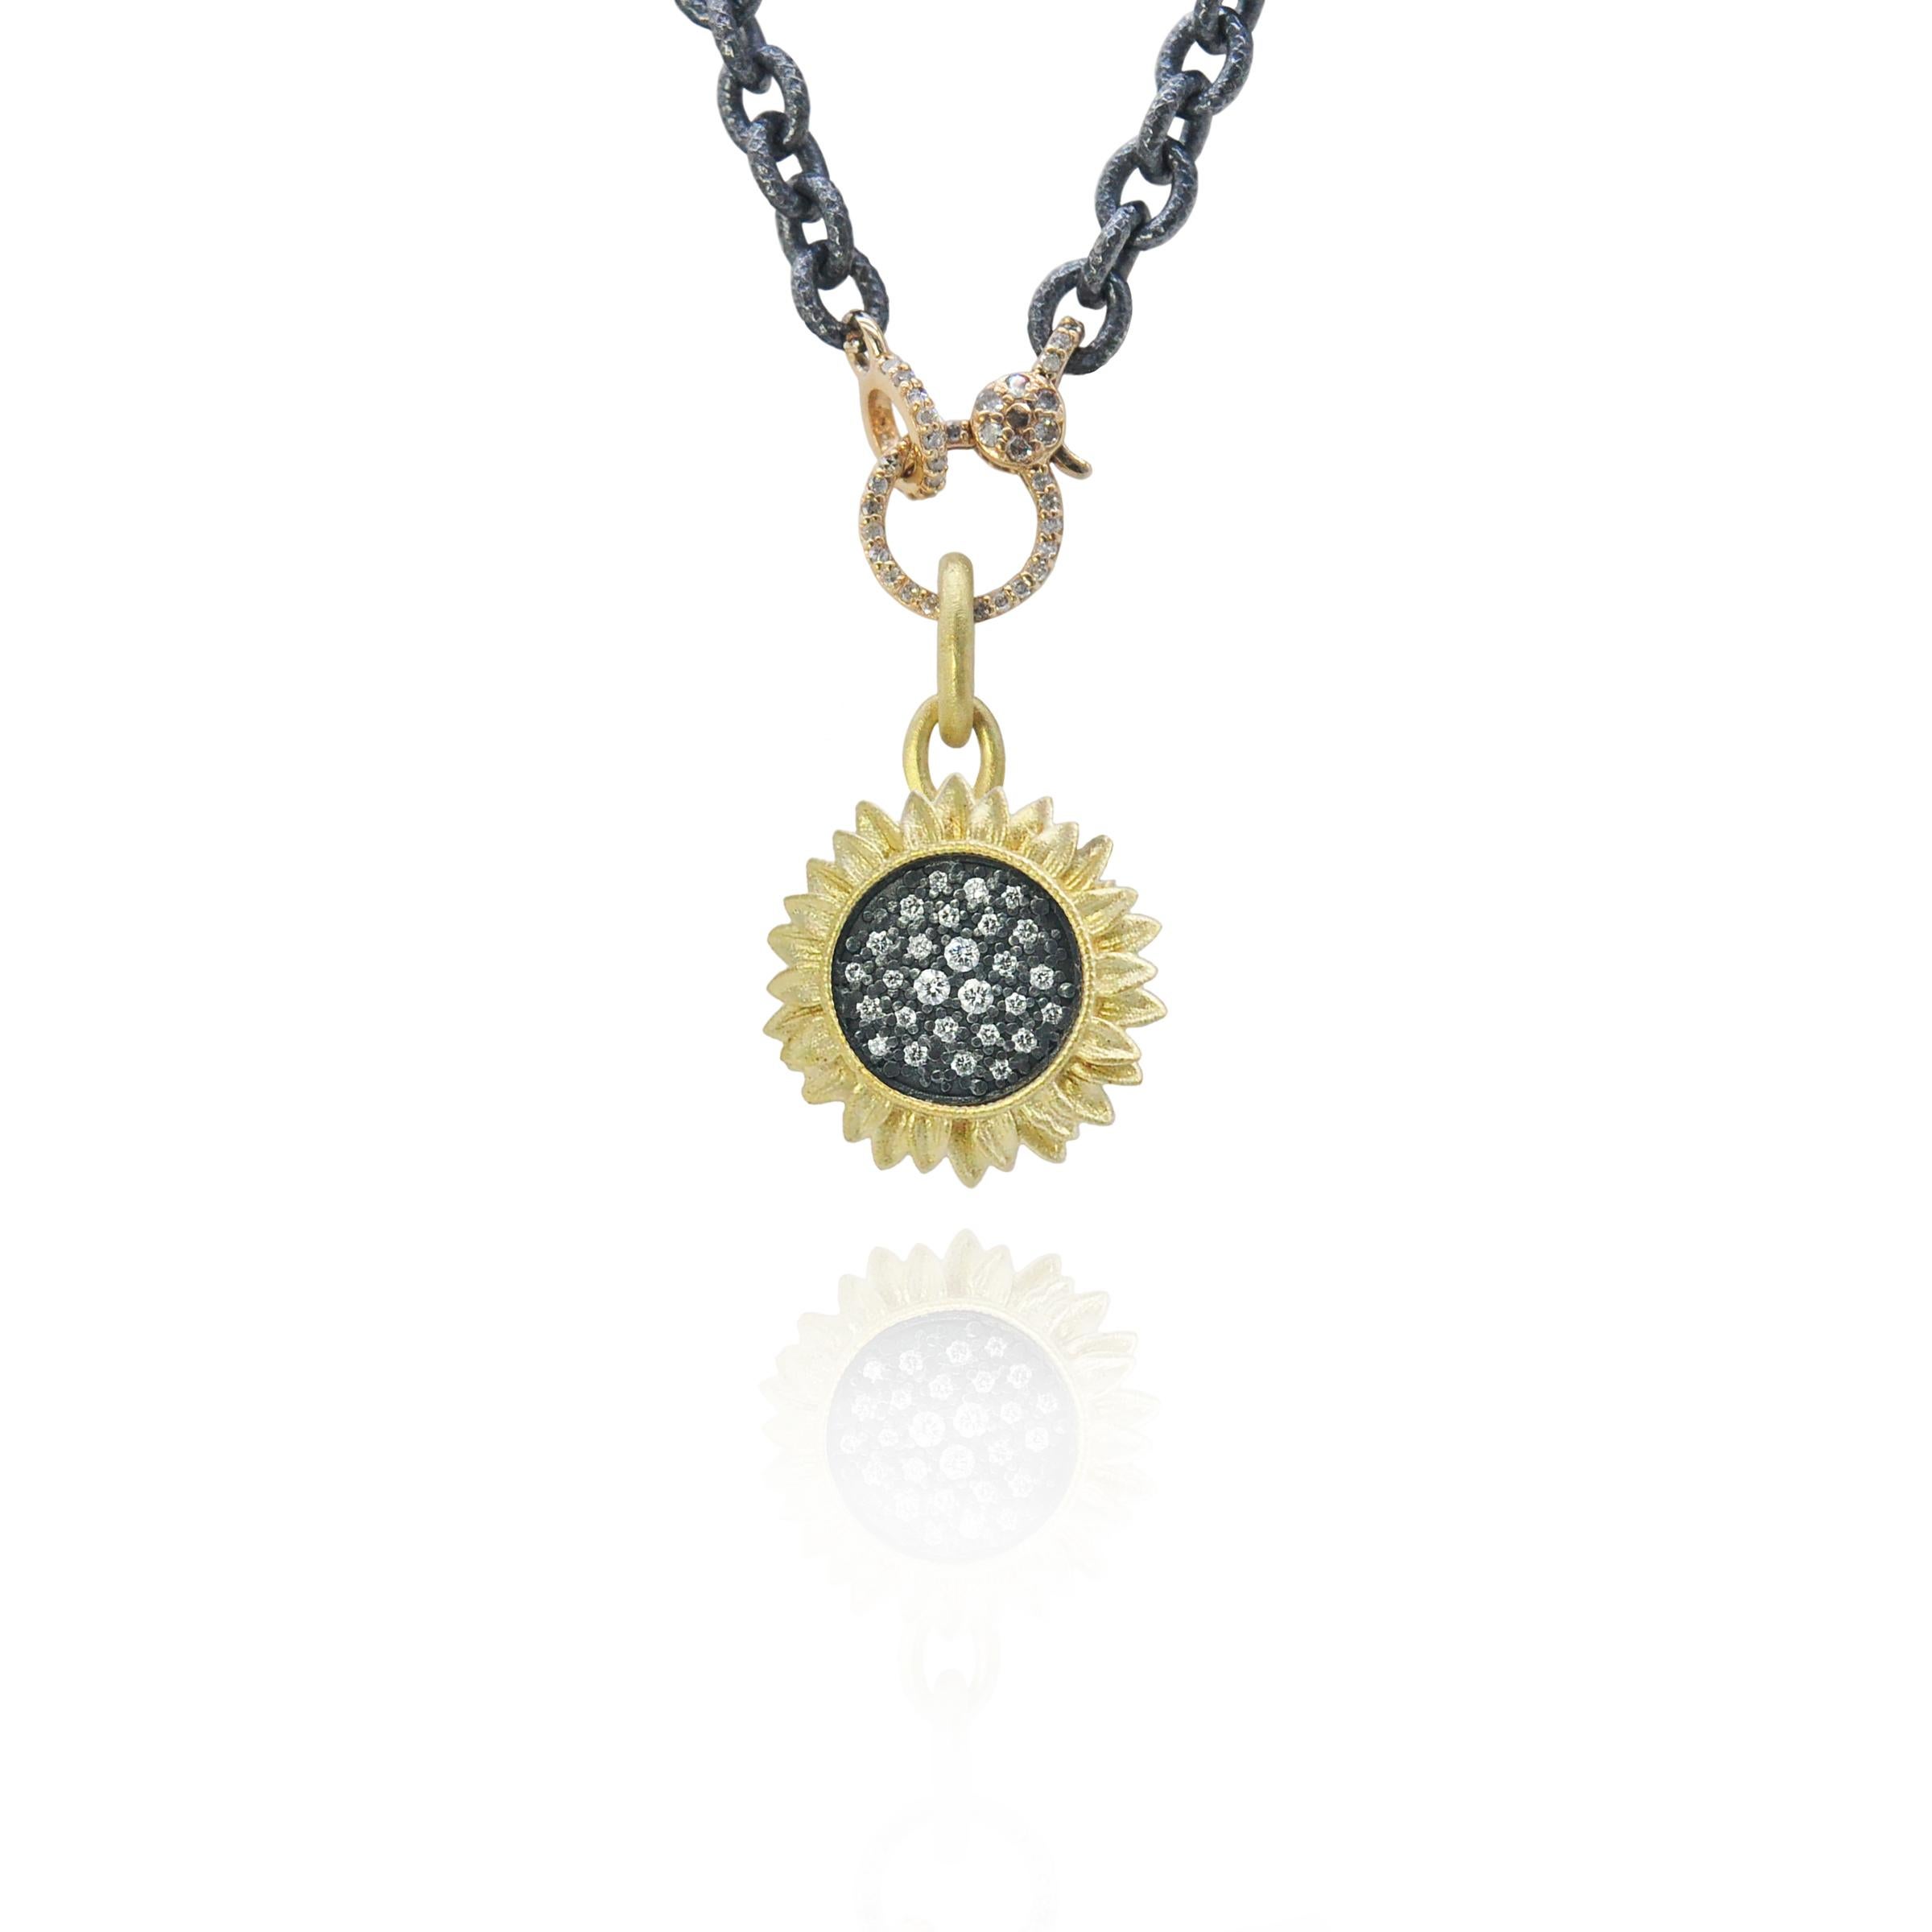 These sparkly sunflowers are even more eye-catching than the real thing!
Sunflower pendants and earrings have 18k yellow gold petals surrounding oxidized sterling silver pave-set diamonds. The gold charm holder clasp on the piece is pave set with